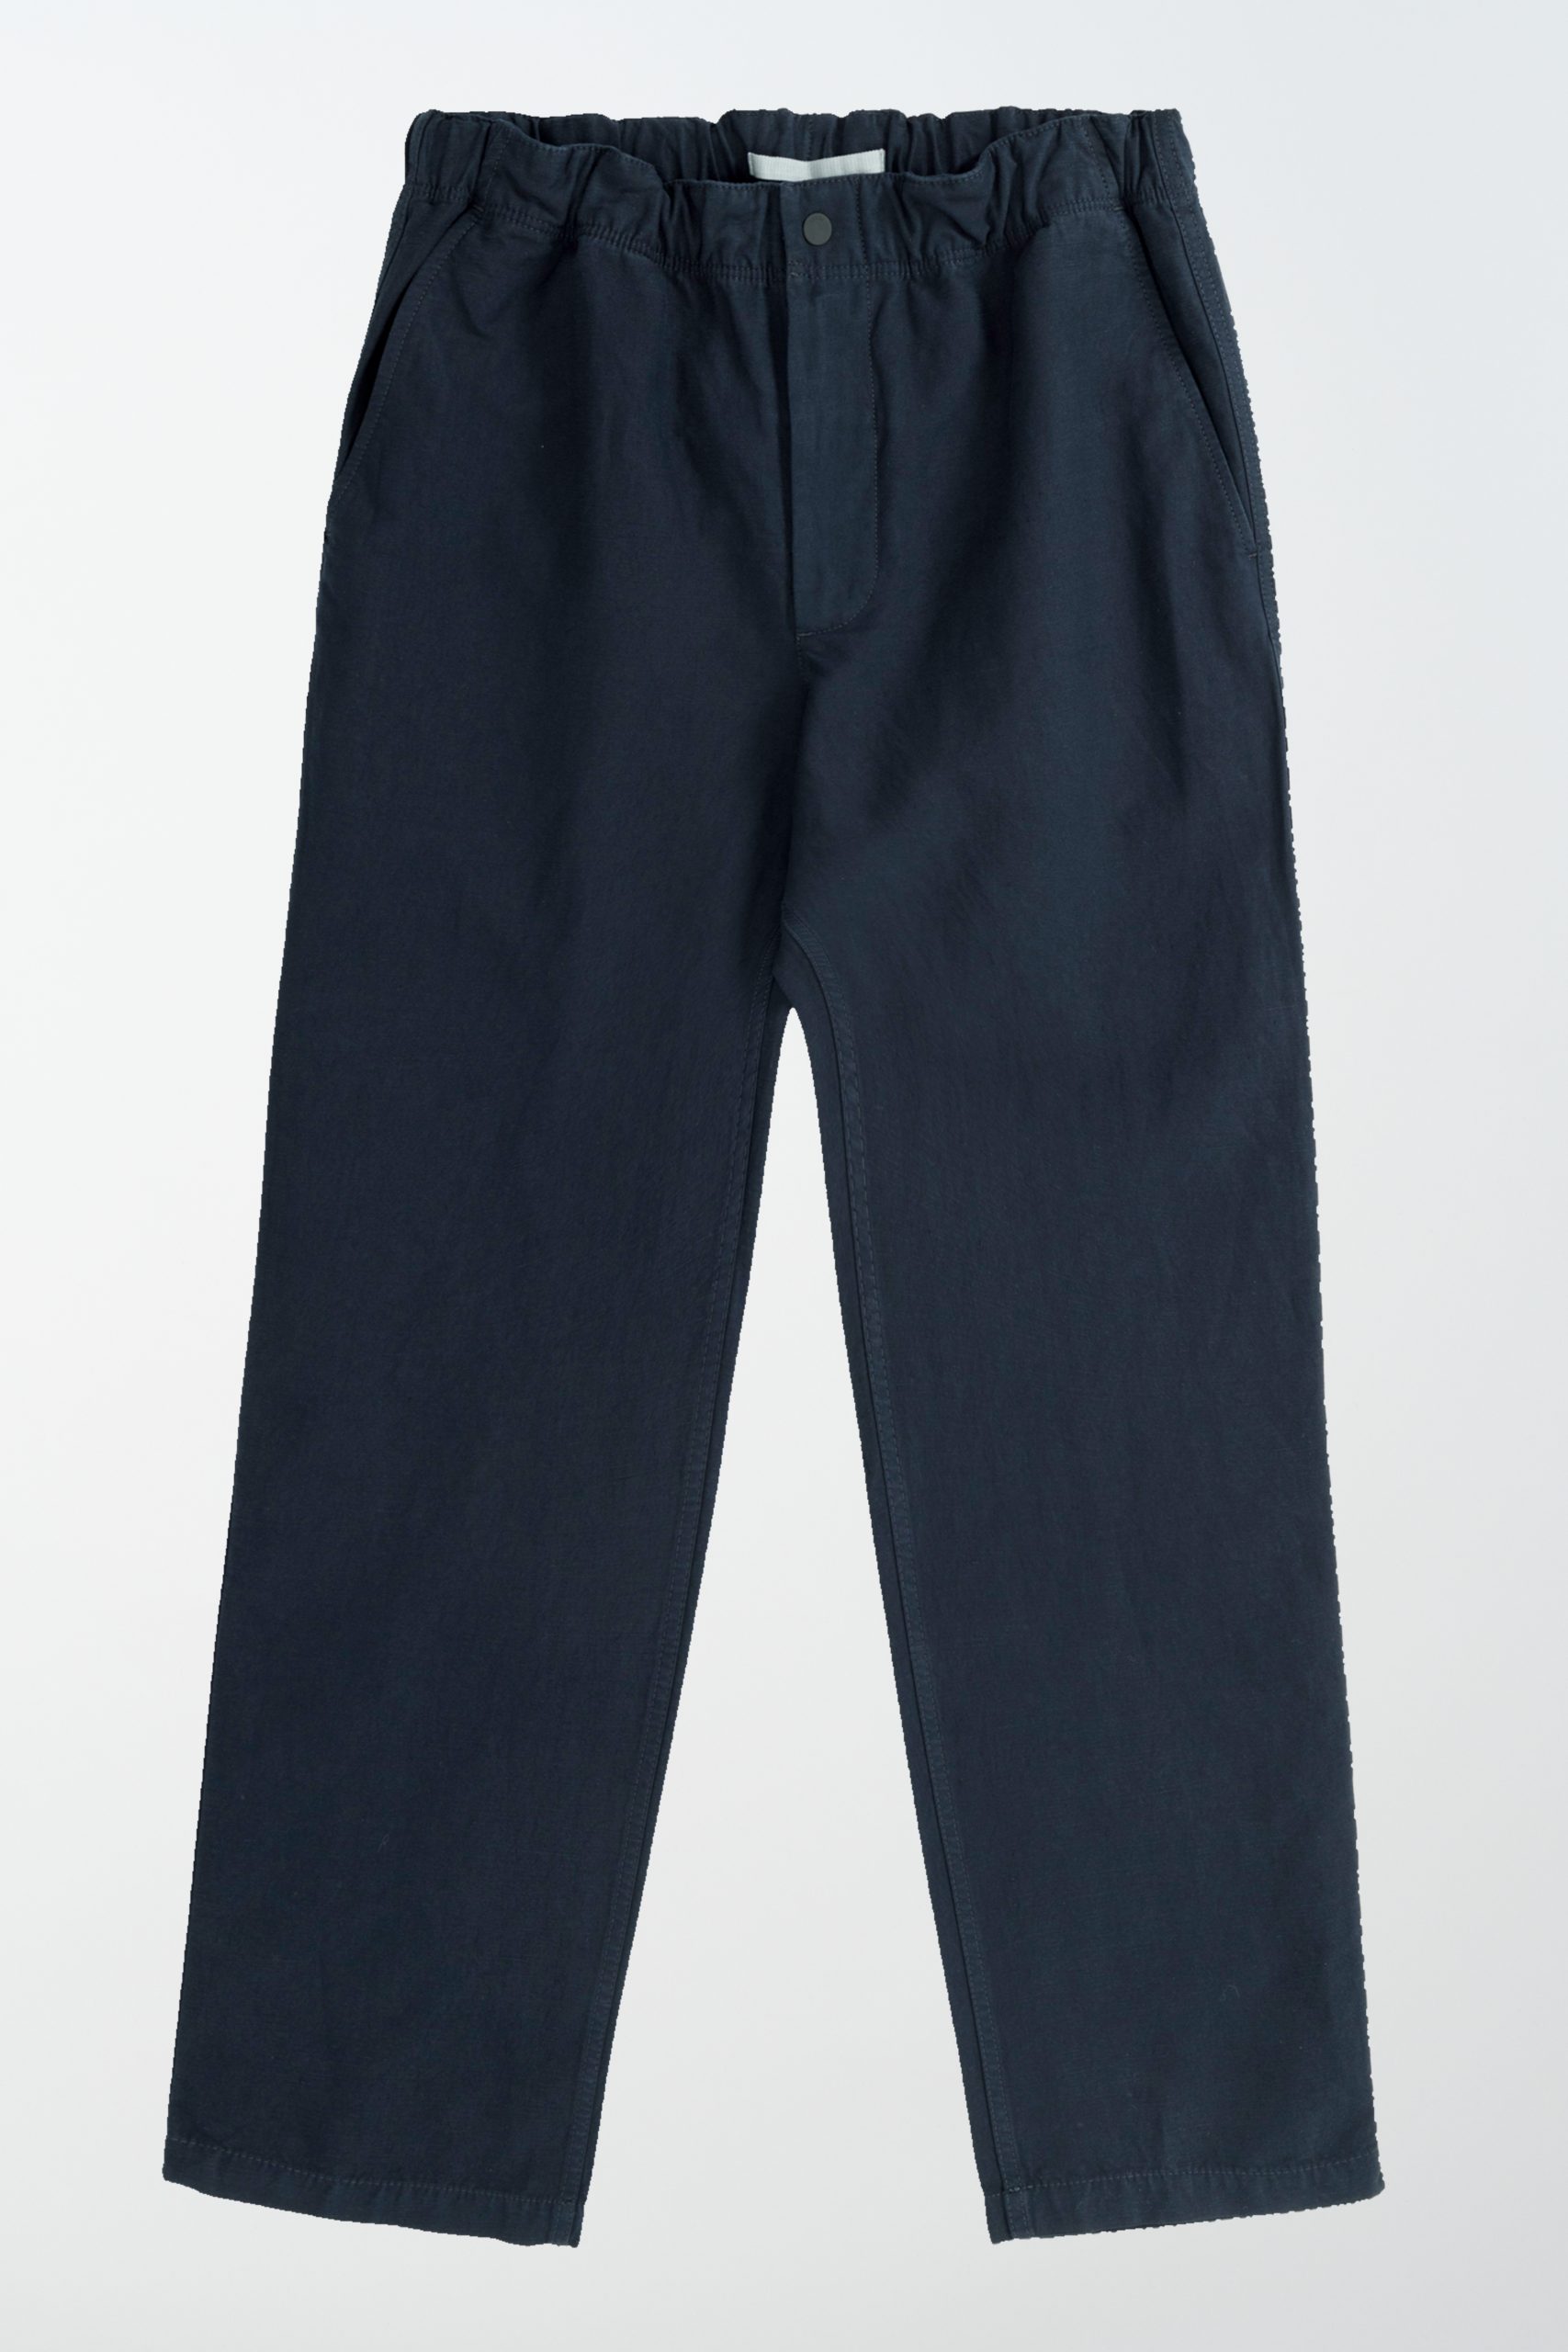 NORSE PROJECTS EZRA Relaxed cotton linen Trouser Dark navy